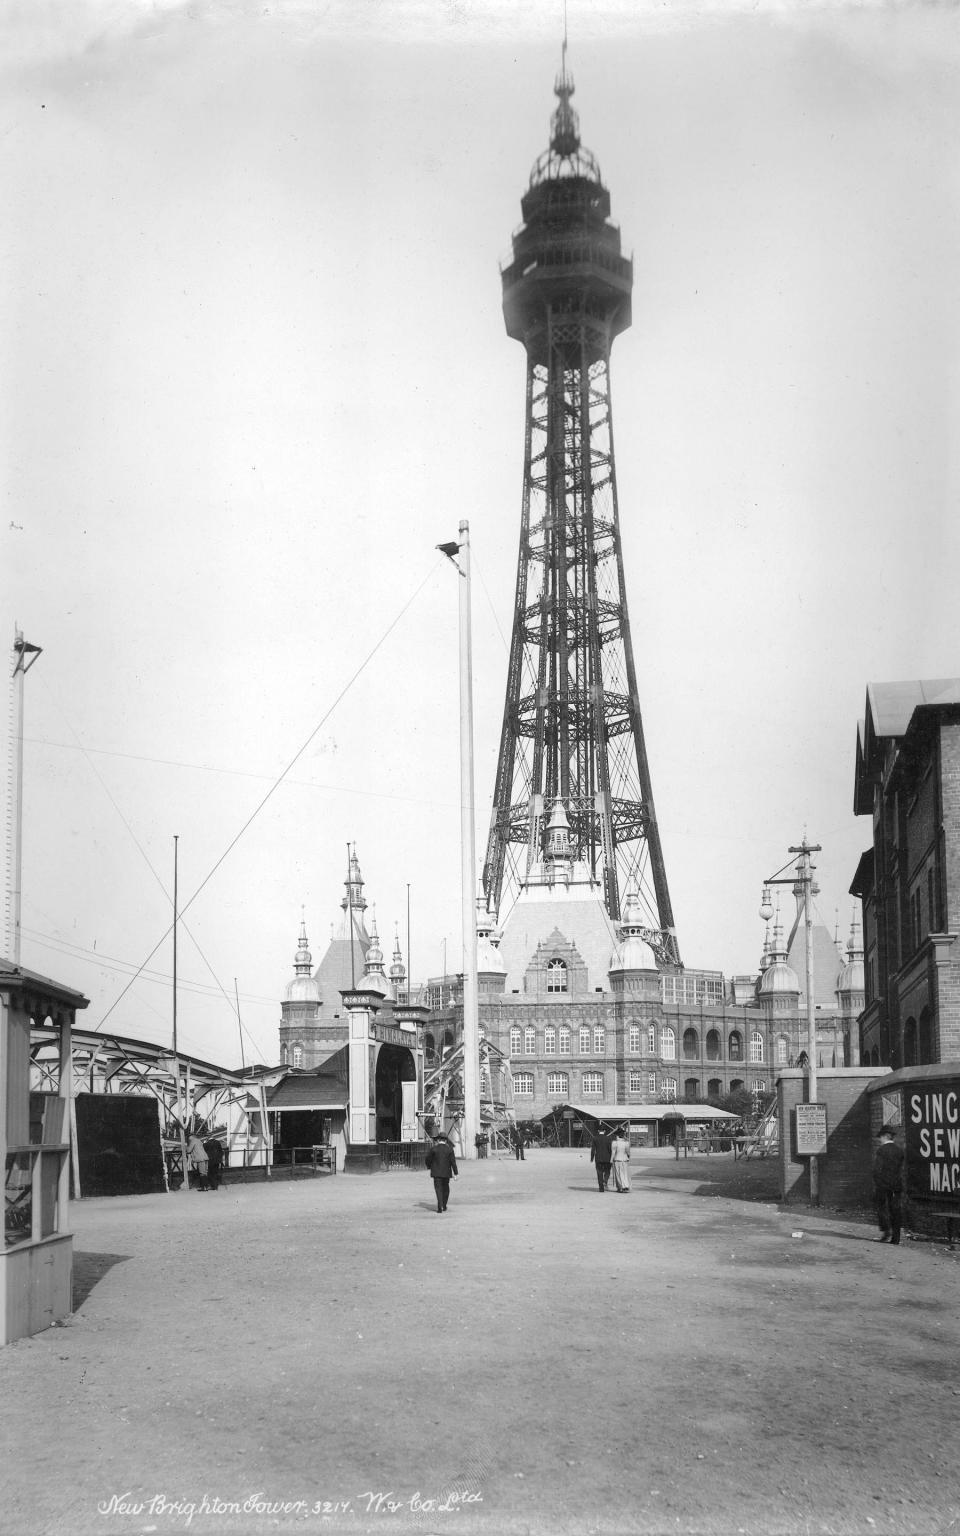 New Brighton Tower - Heritage Images/Getty